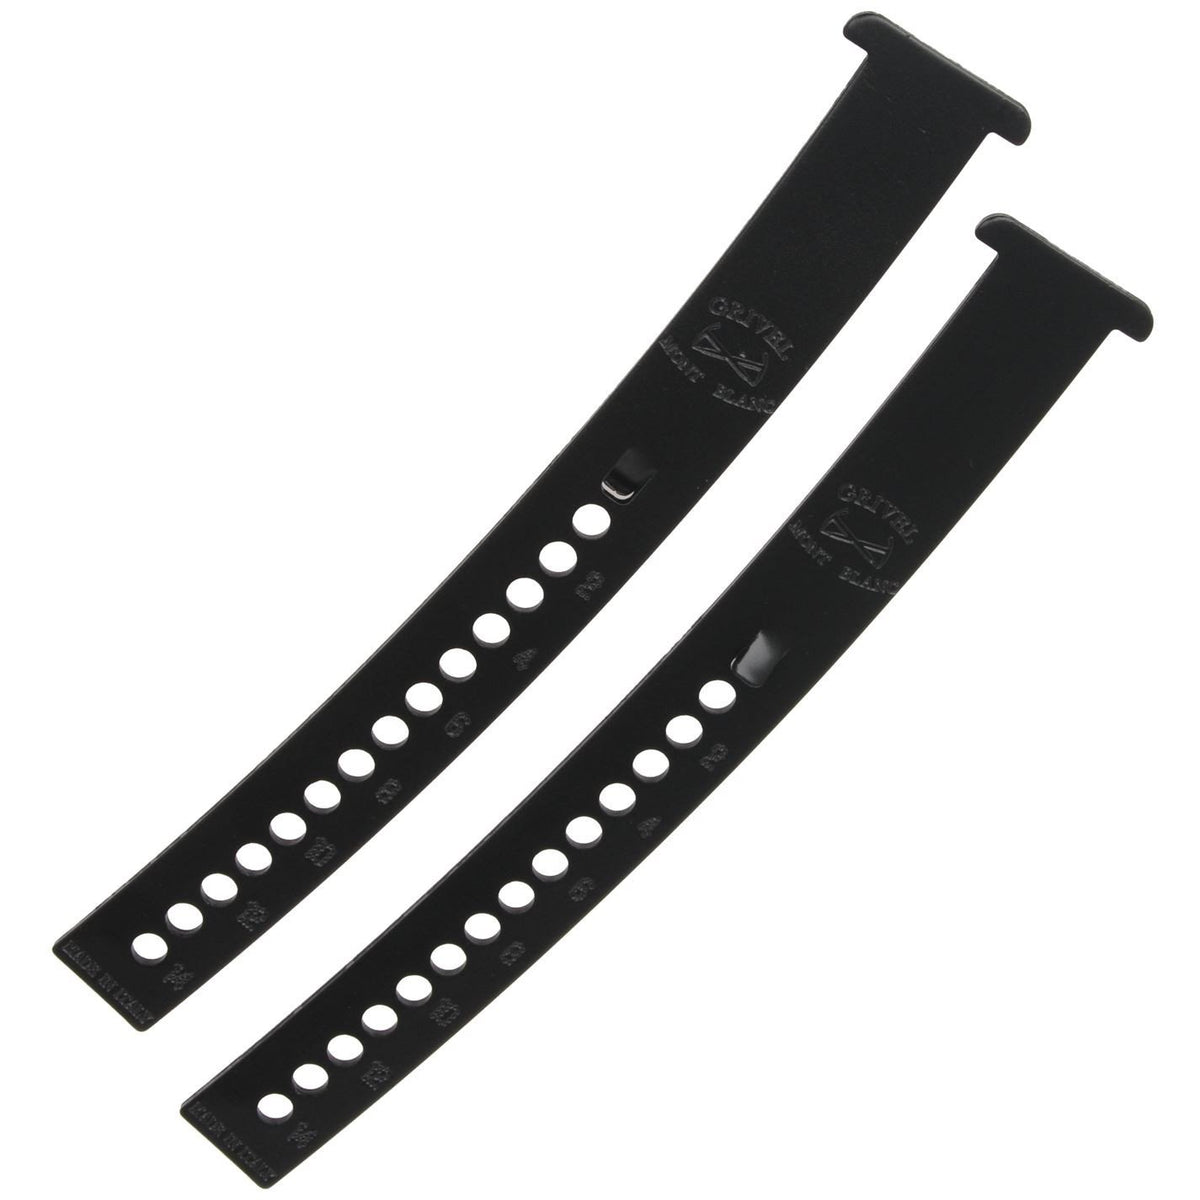 Grivel Long Extension Bar, pair shown side by side, in black colour.